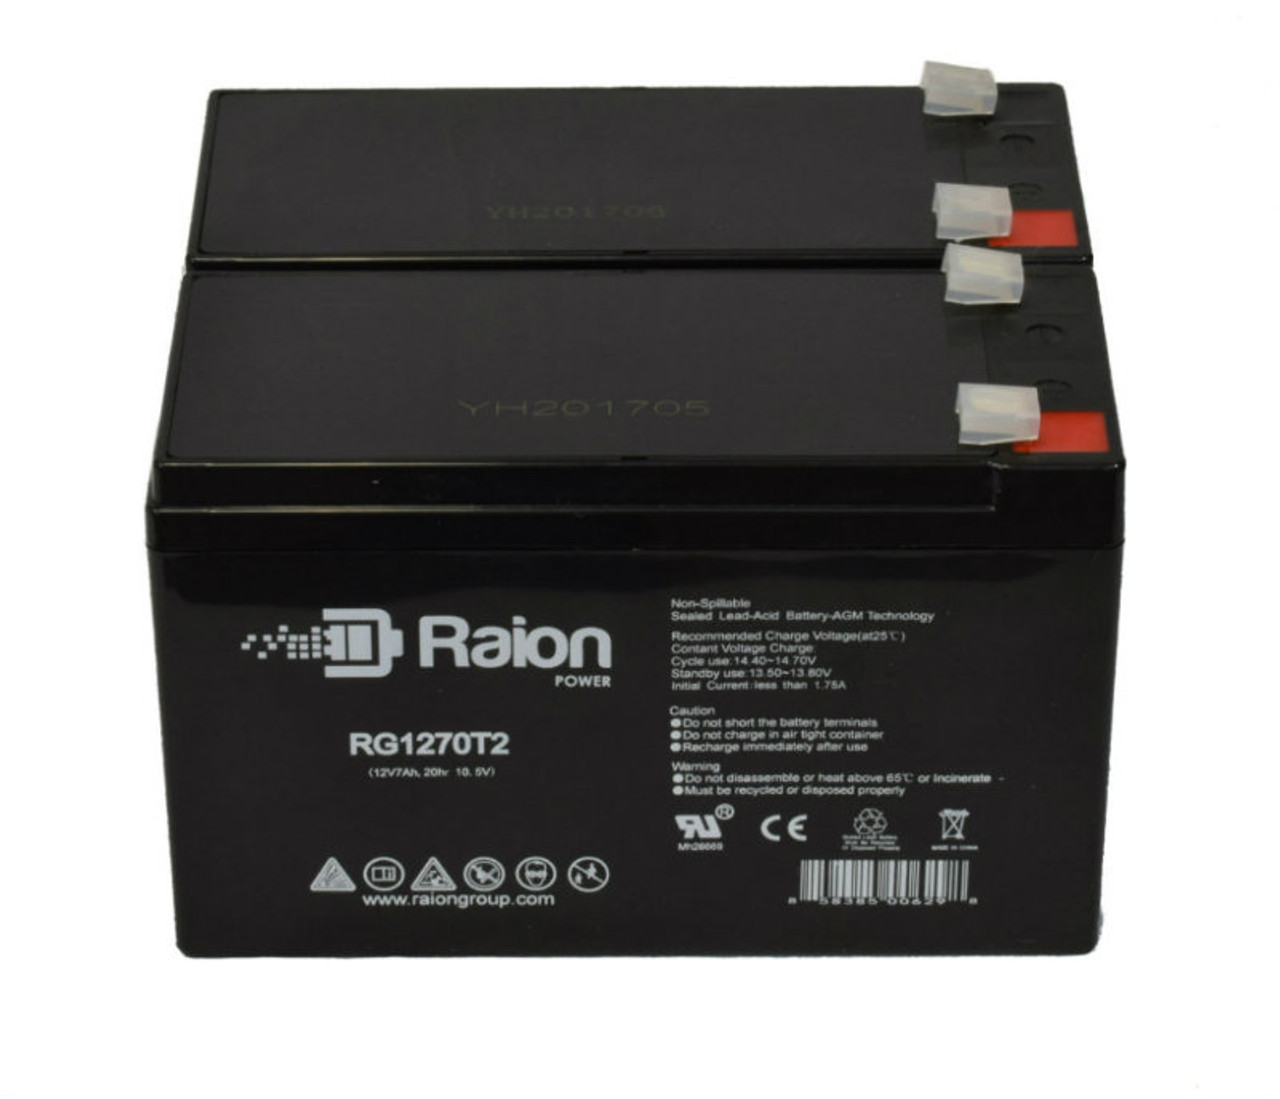 Raion Power Replacement 12V 7Ah Battery for RPower GIV1270V F1 - 2 Pack